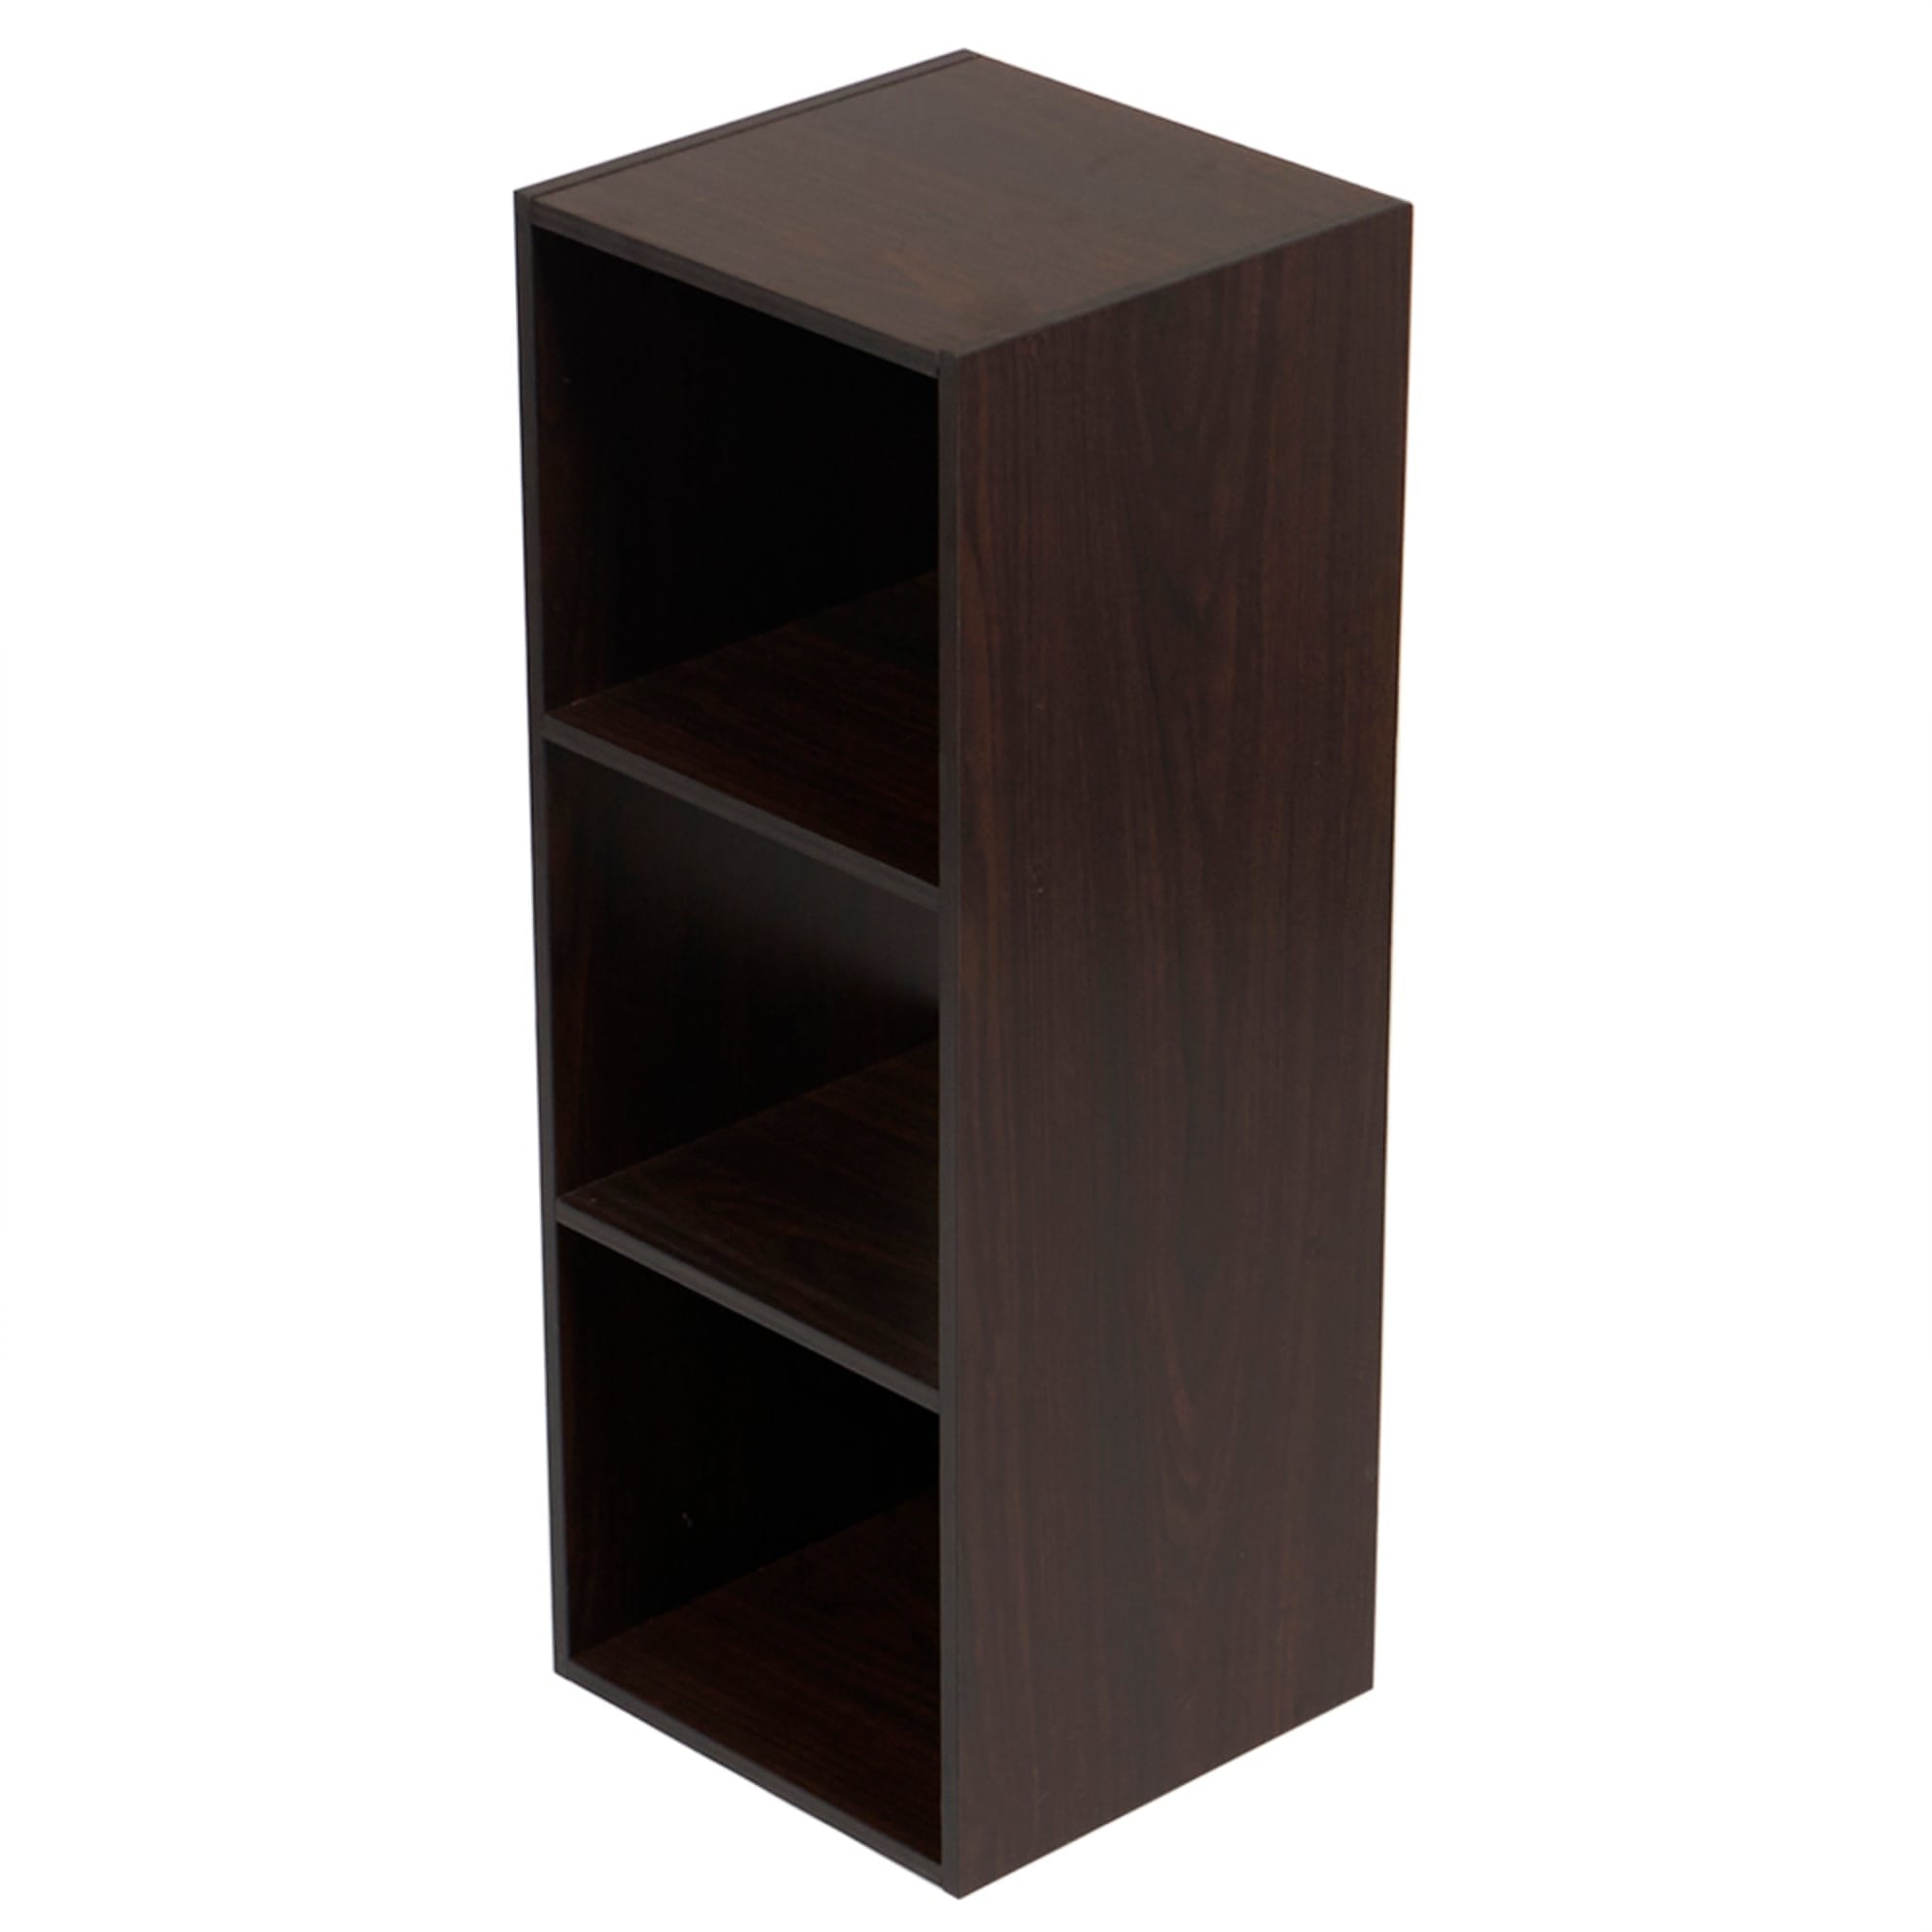 Home Basics Open and Enclosed 3 Cube MDF Storage Organizer, Espresso $20.00 EACH, CASE PACK OF 1